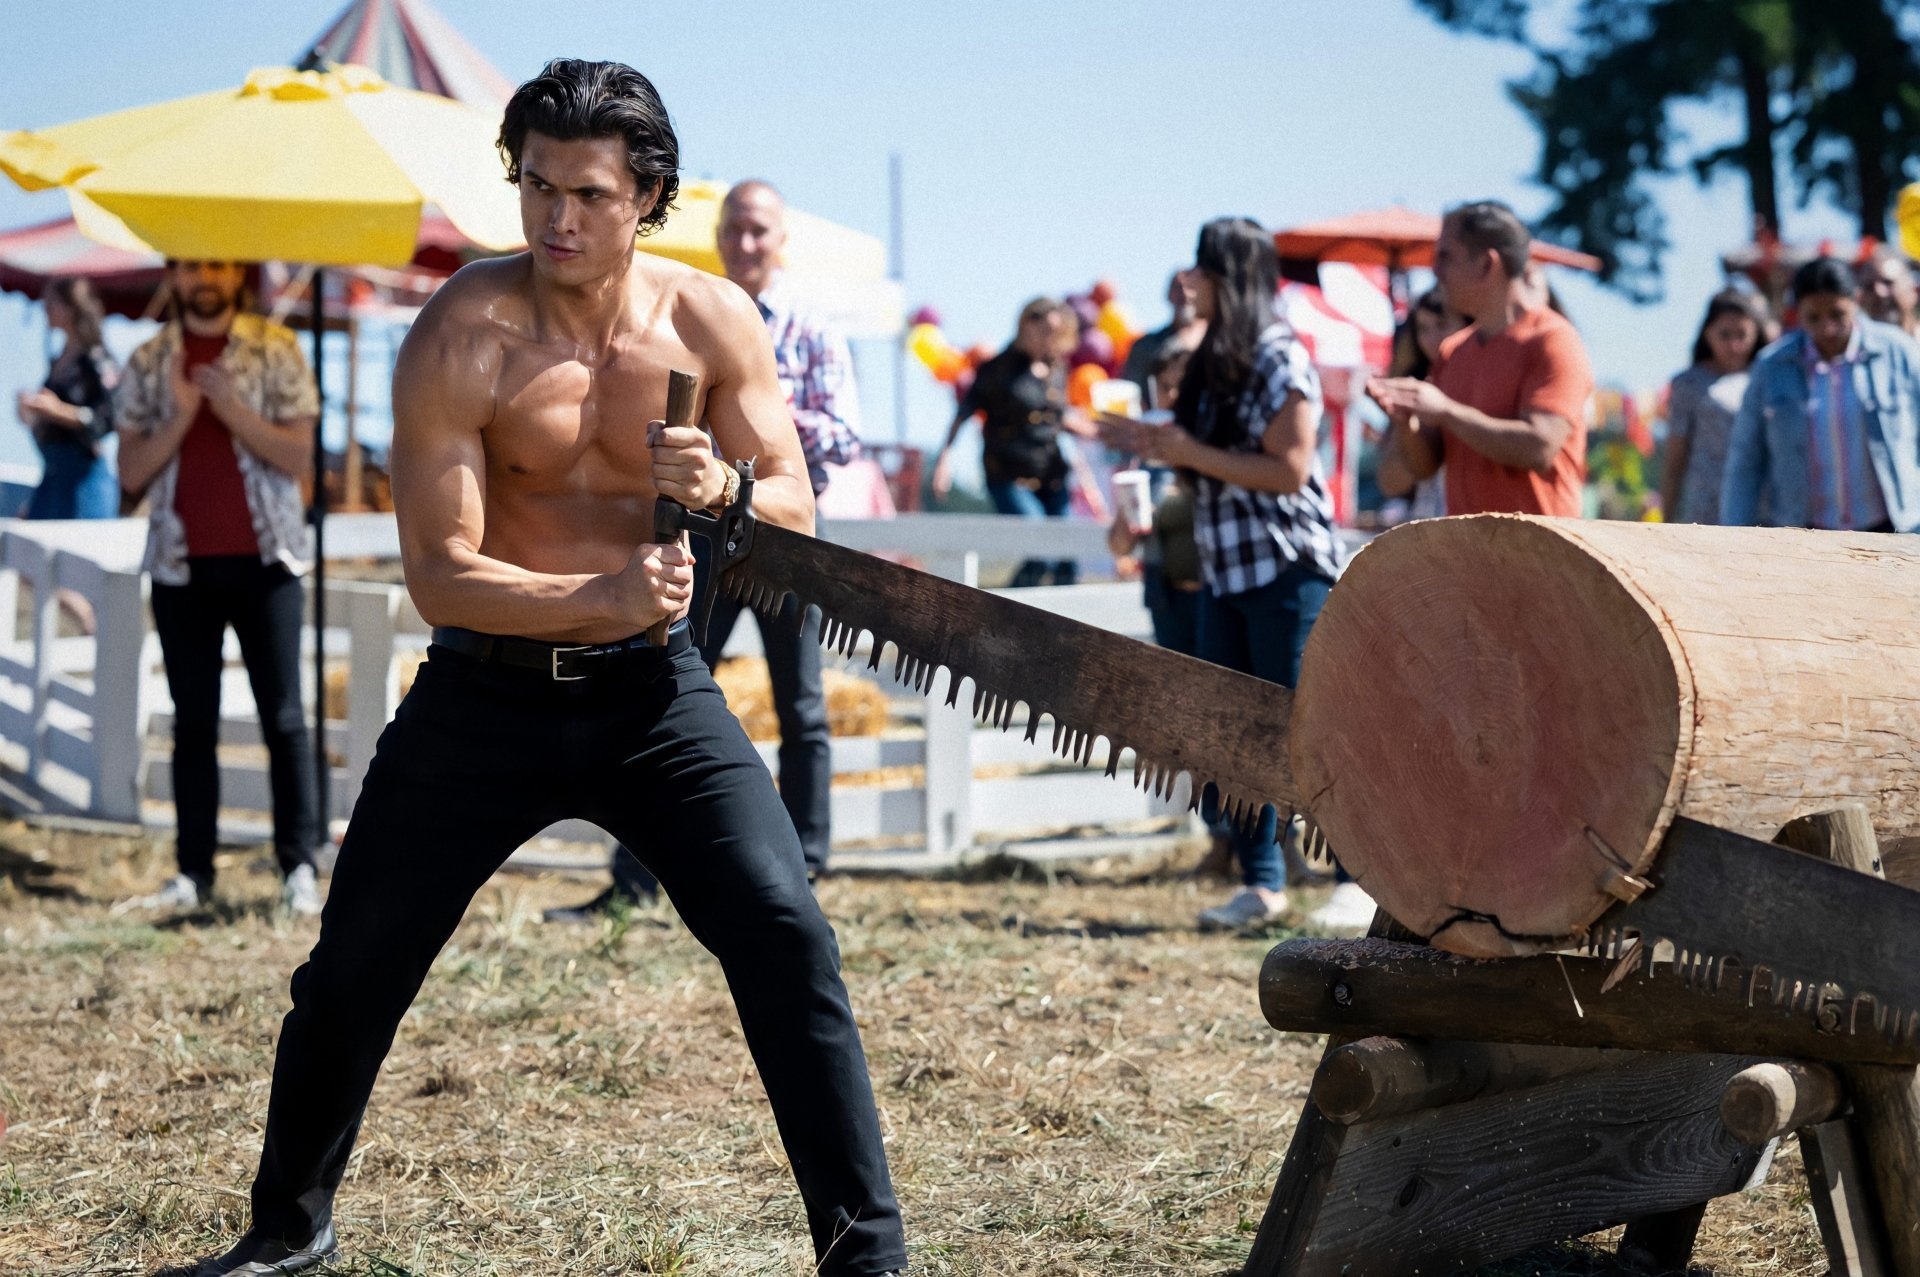 Lumberjack: Two-handed saw, Masculinity, Riverdale TV series, Logging industry, Cole Sprouse. 1920x1280 HD Wallpaper.